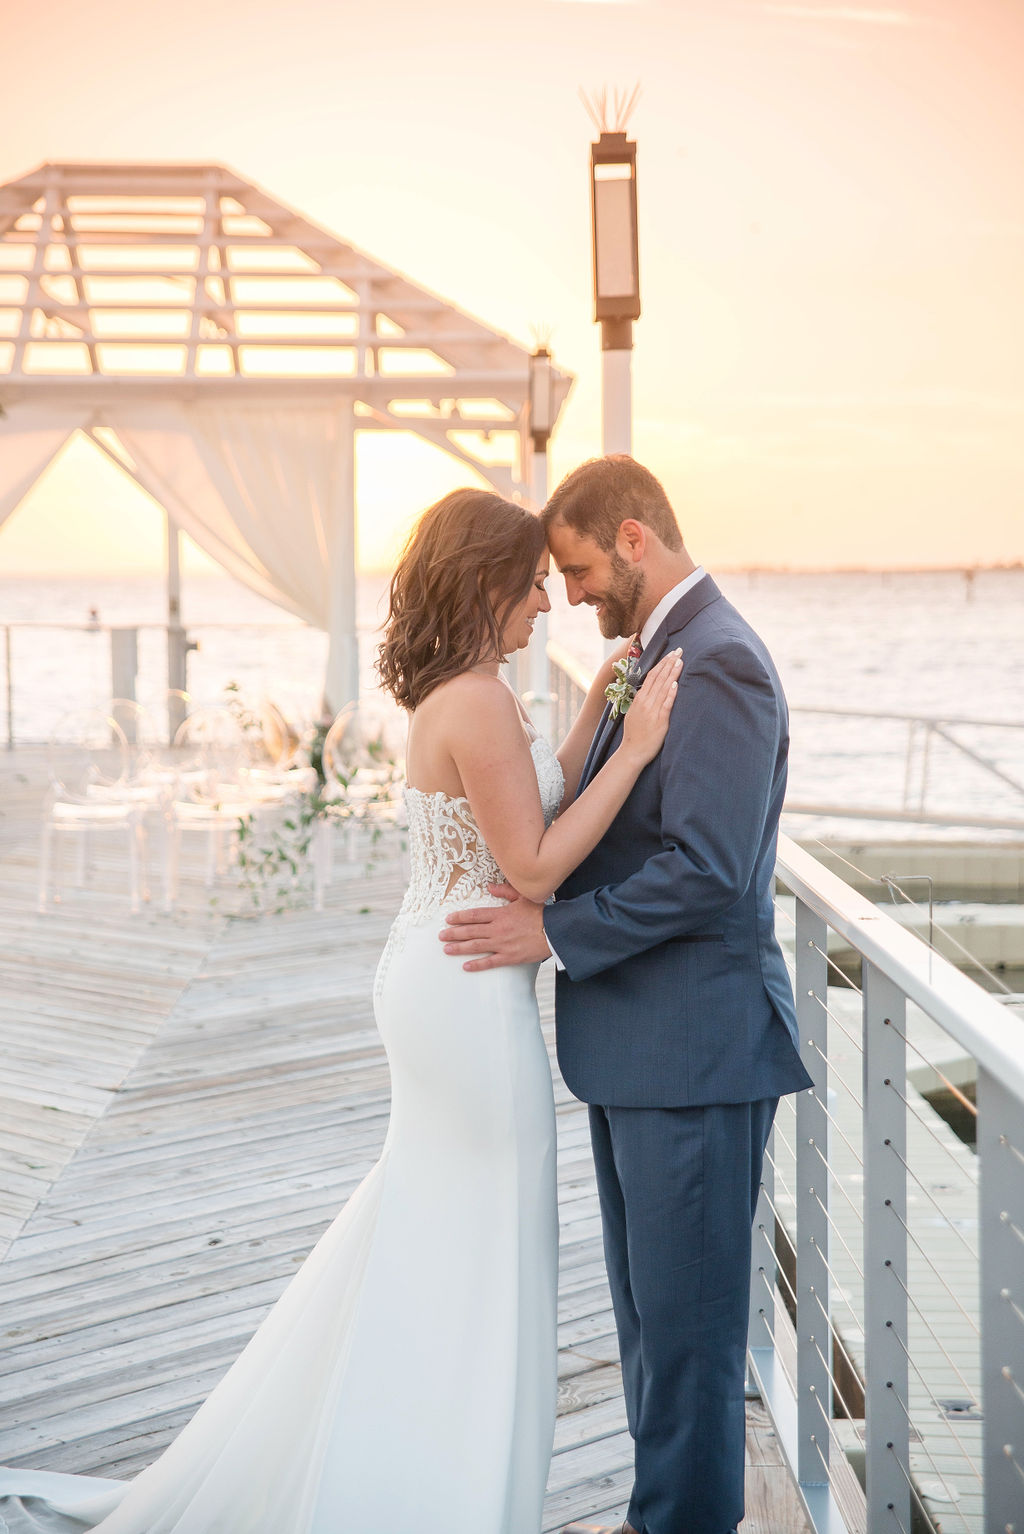 Sunset Outdoor Waterfront Bride and Groom Wedding Portrait | Tampa Wedding Photographer Kristen Marie Photography | Tampa Venue The Godfrey